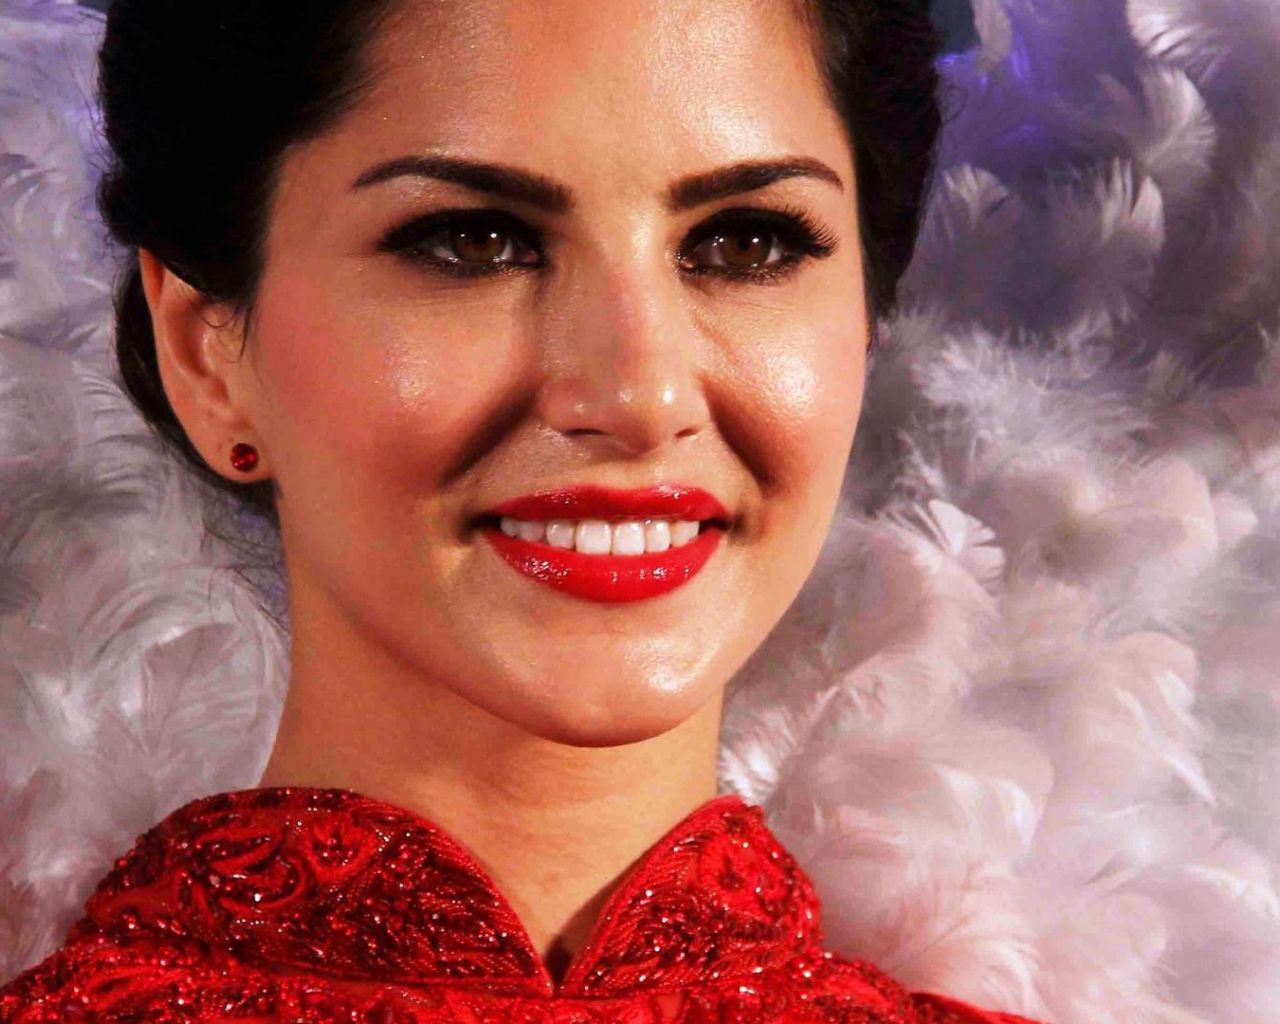 Desktop Wallpaper Beautiful Sunny Leone In Red Lips, HD Image, Picture, Background, Mjzx2p